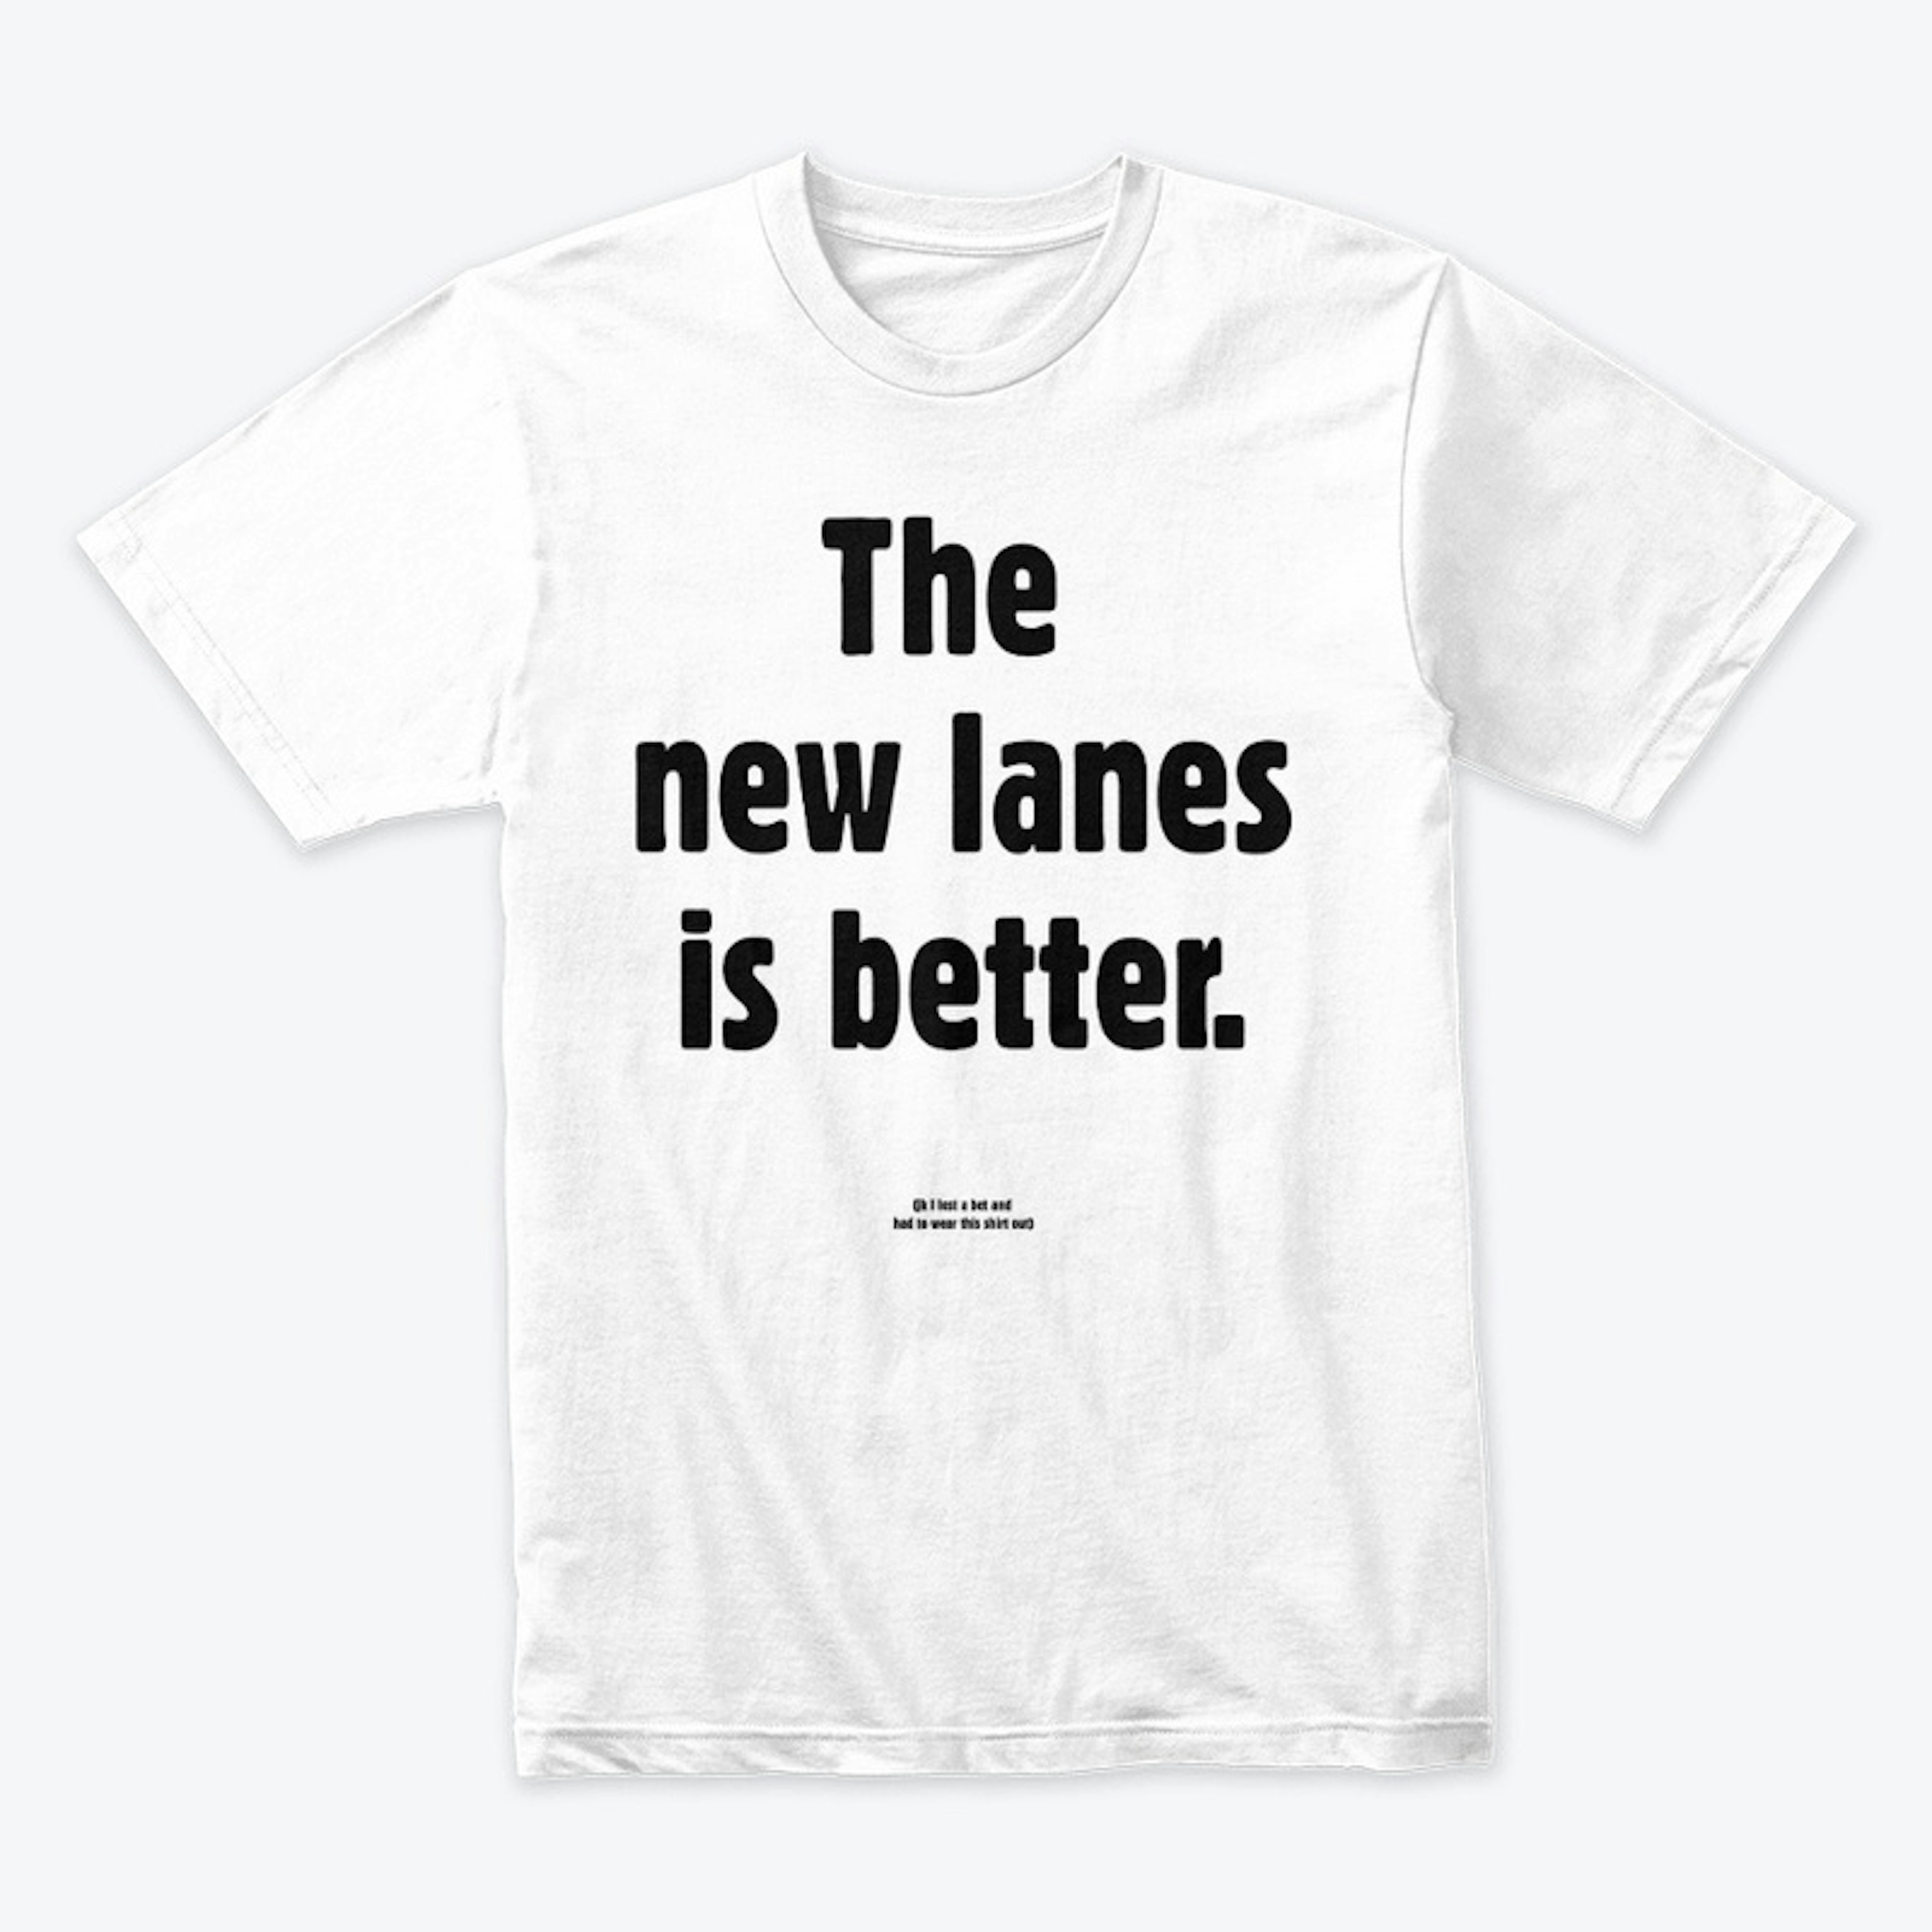 The new lanes is better